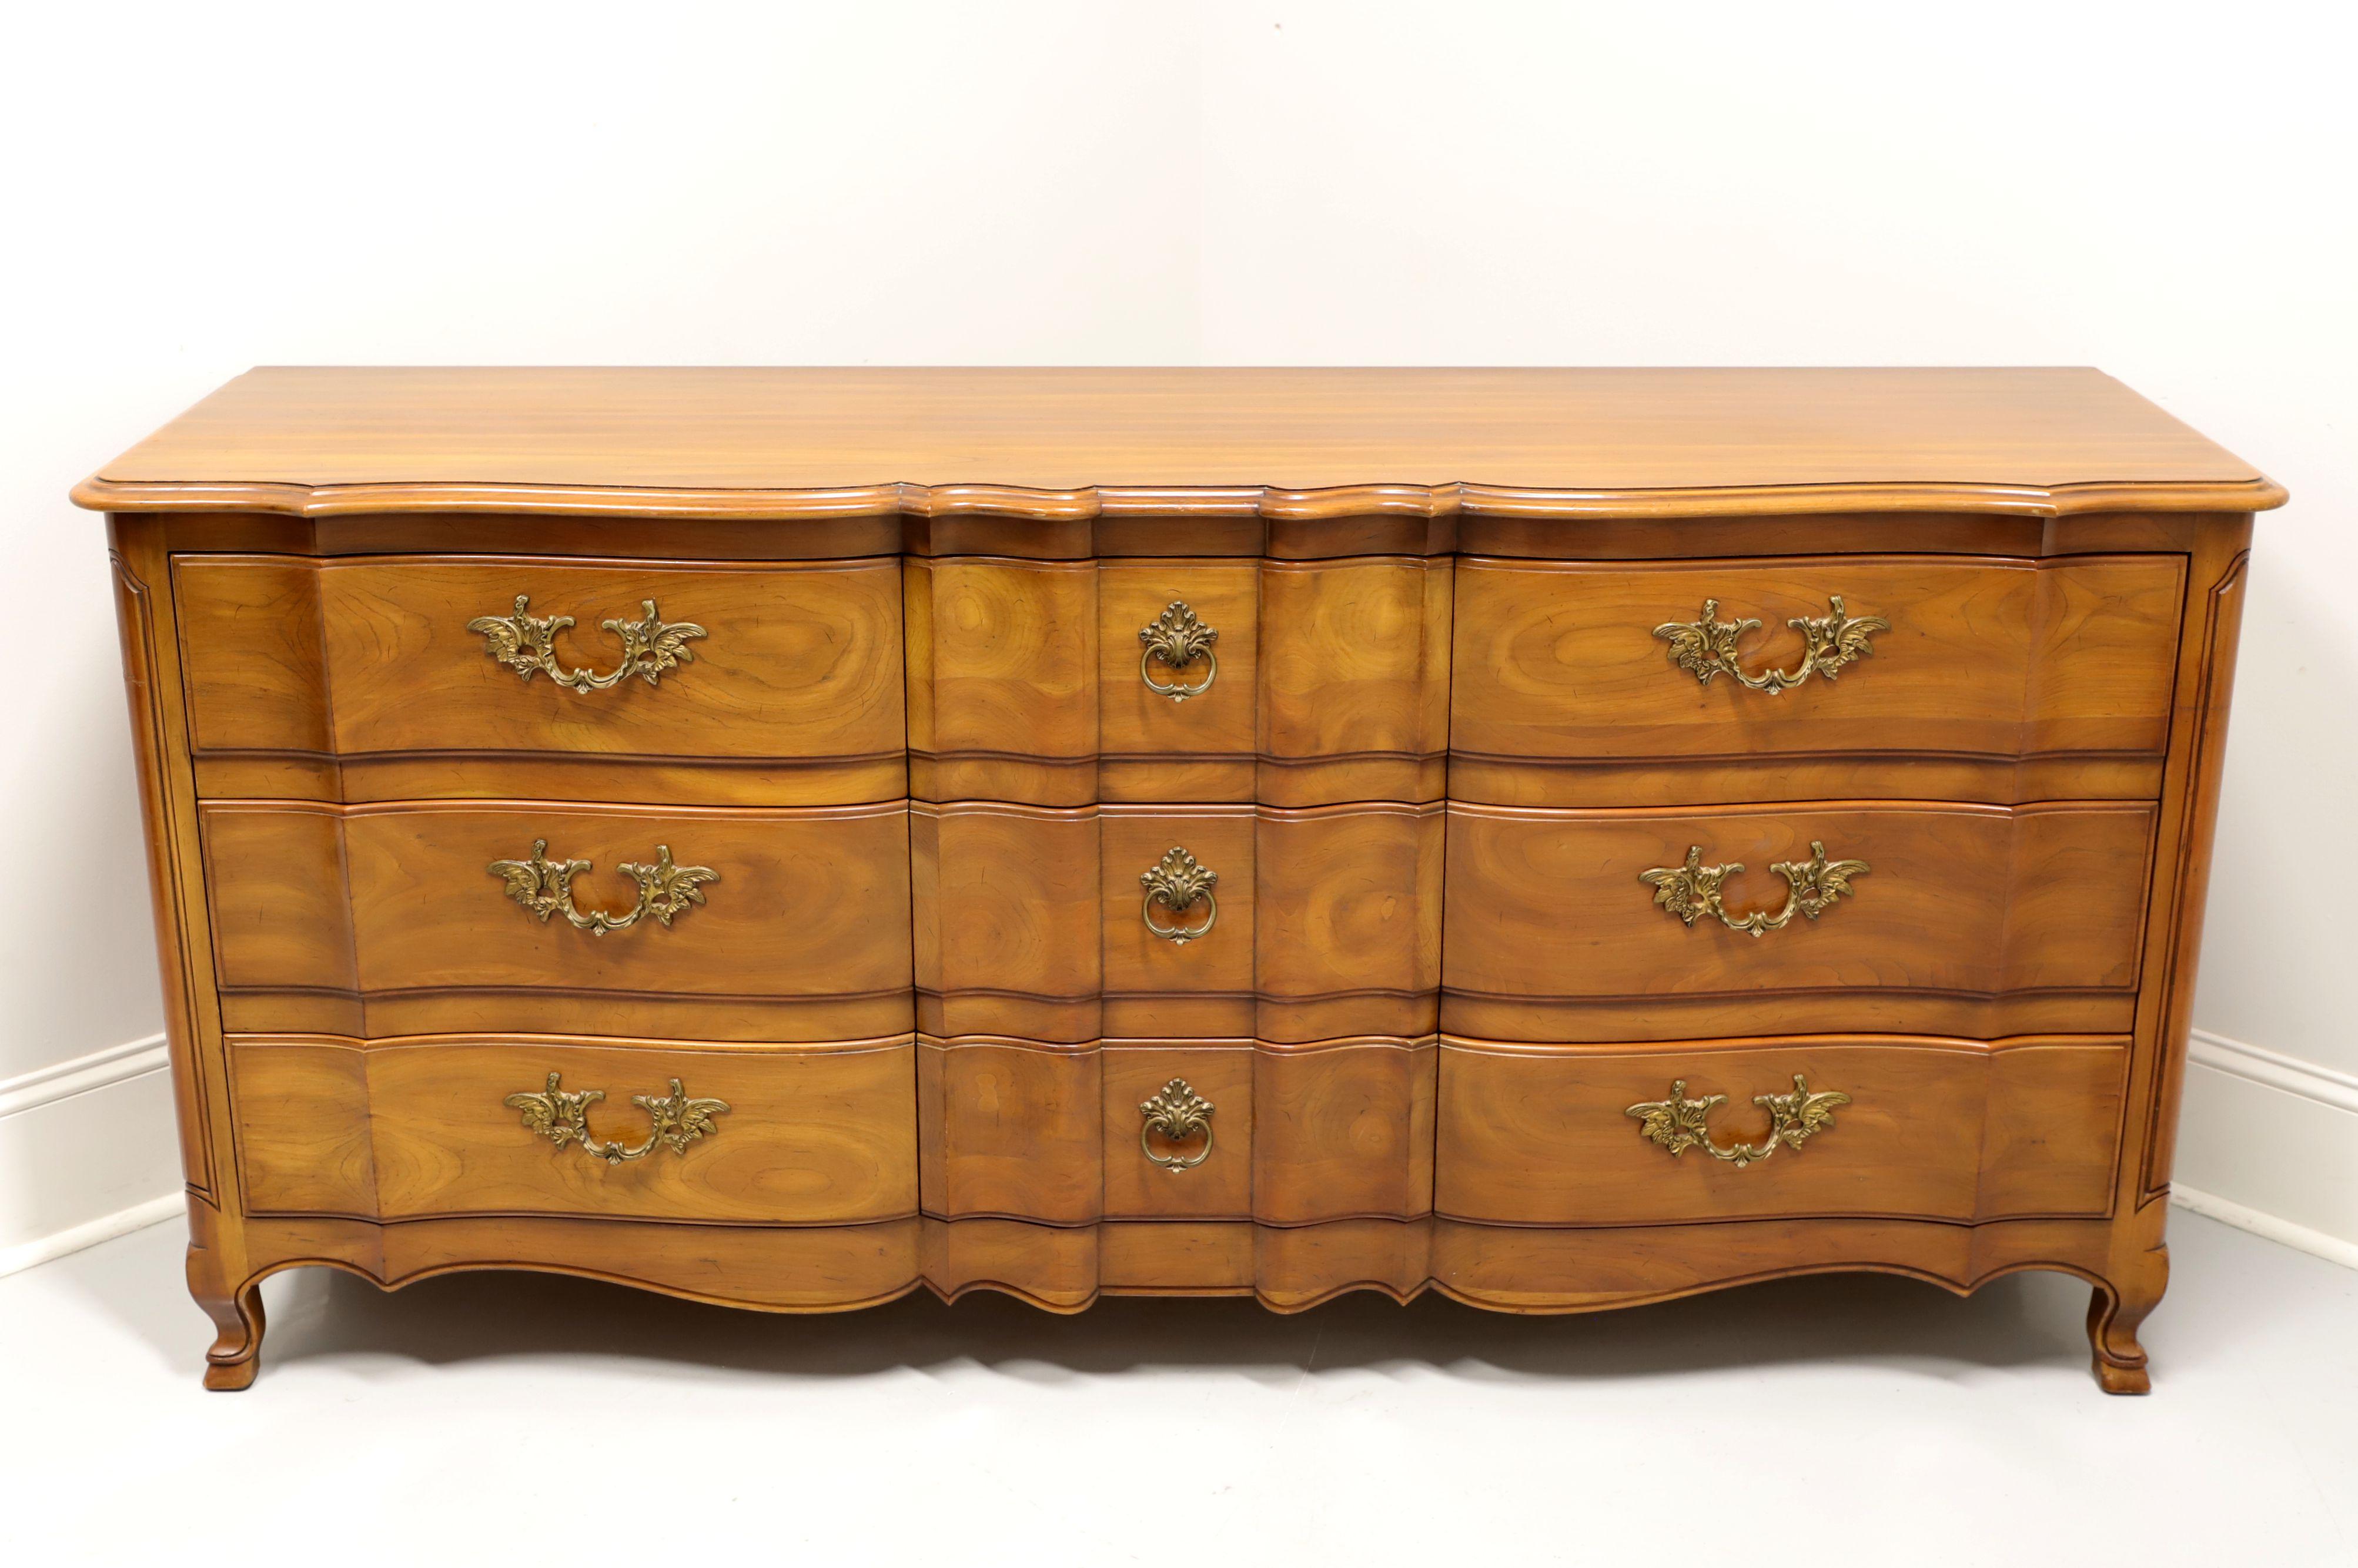 A French Country style nine drawer triple dresser by John Widdicomb. Solid cherry with brass hardware, serpentine front, carved panels to front sides and scroll feet. Features nine drawers of dovetail construction with top row right and left drawers